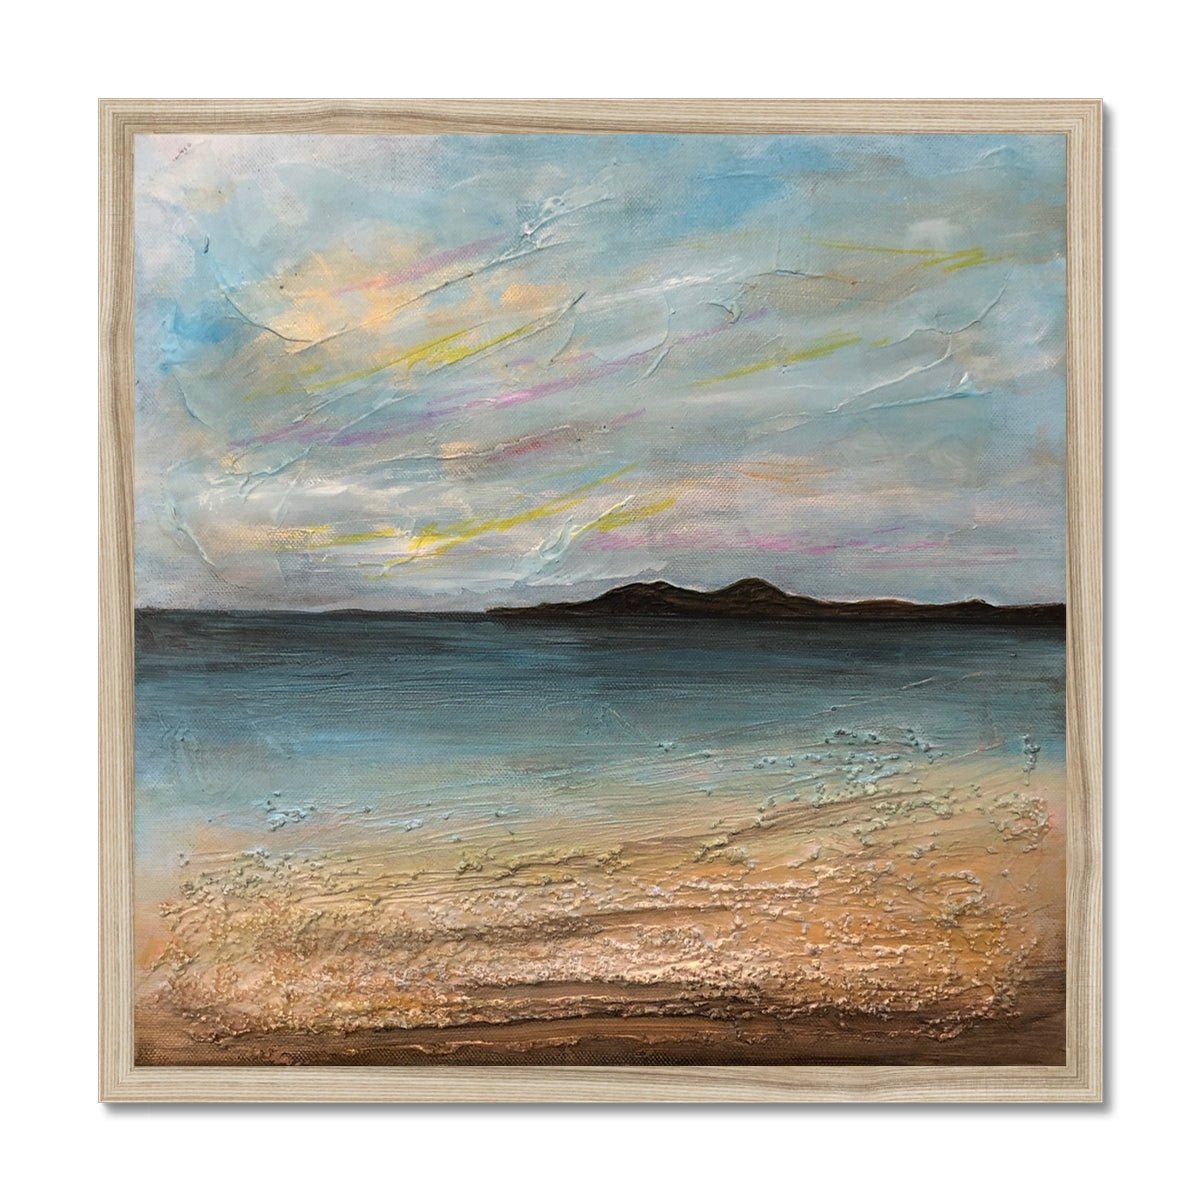 Garrynamonie Beach South Uist Painting | Framed Prints From Scotland-Framed Prints-Hebridean Islands Art Gallery-20"x20"-Natural Frame-Paintings, Prints, Homeware, Art Gifts From Scotland By Scottish Artist Kevin Hunter